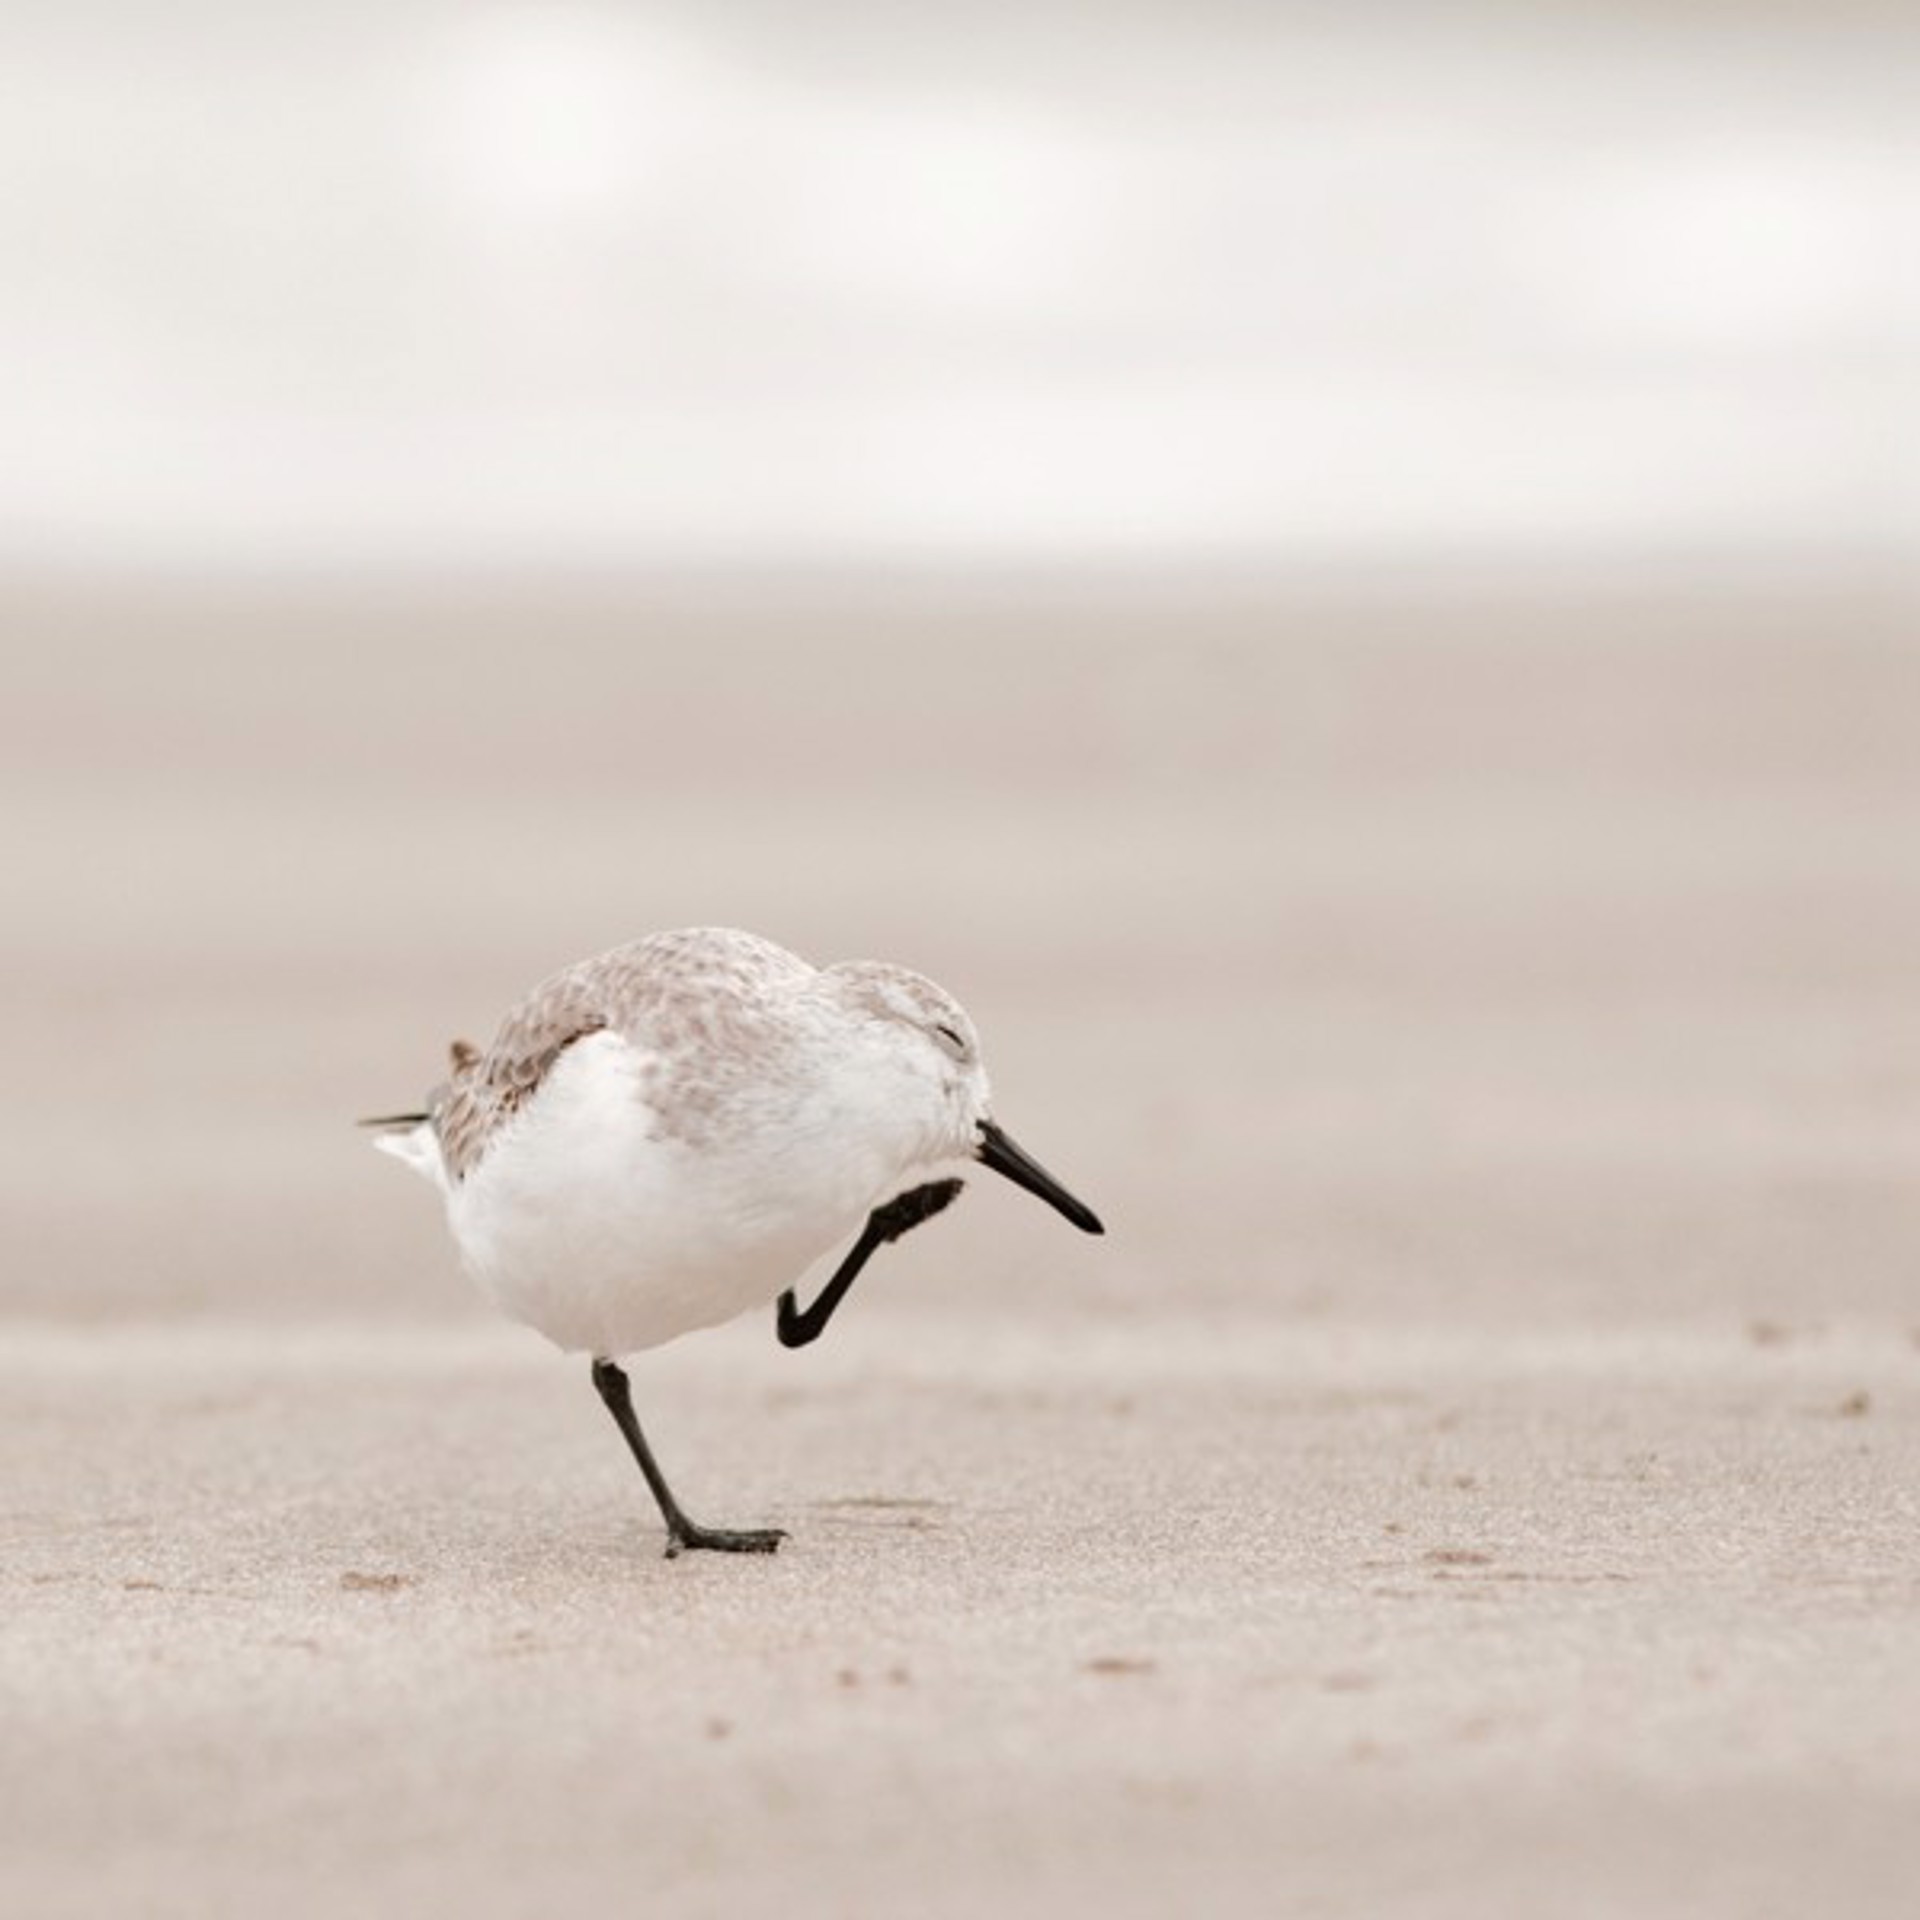 Sandpiper, II by Penny Hoey